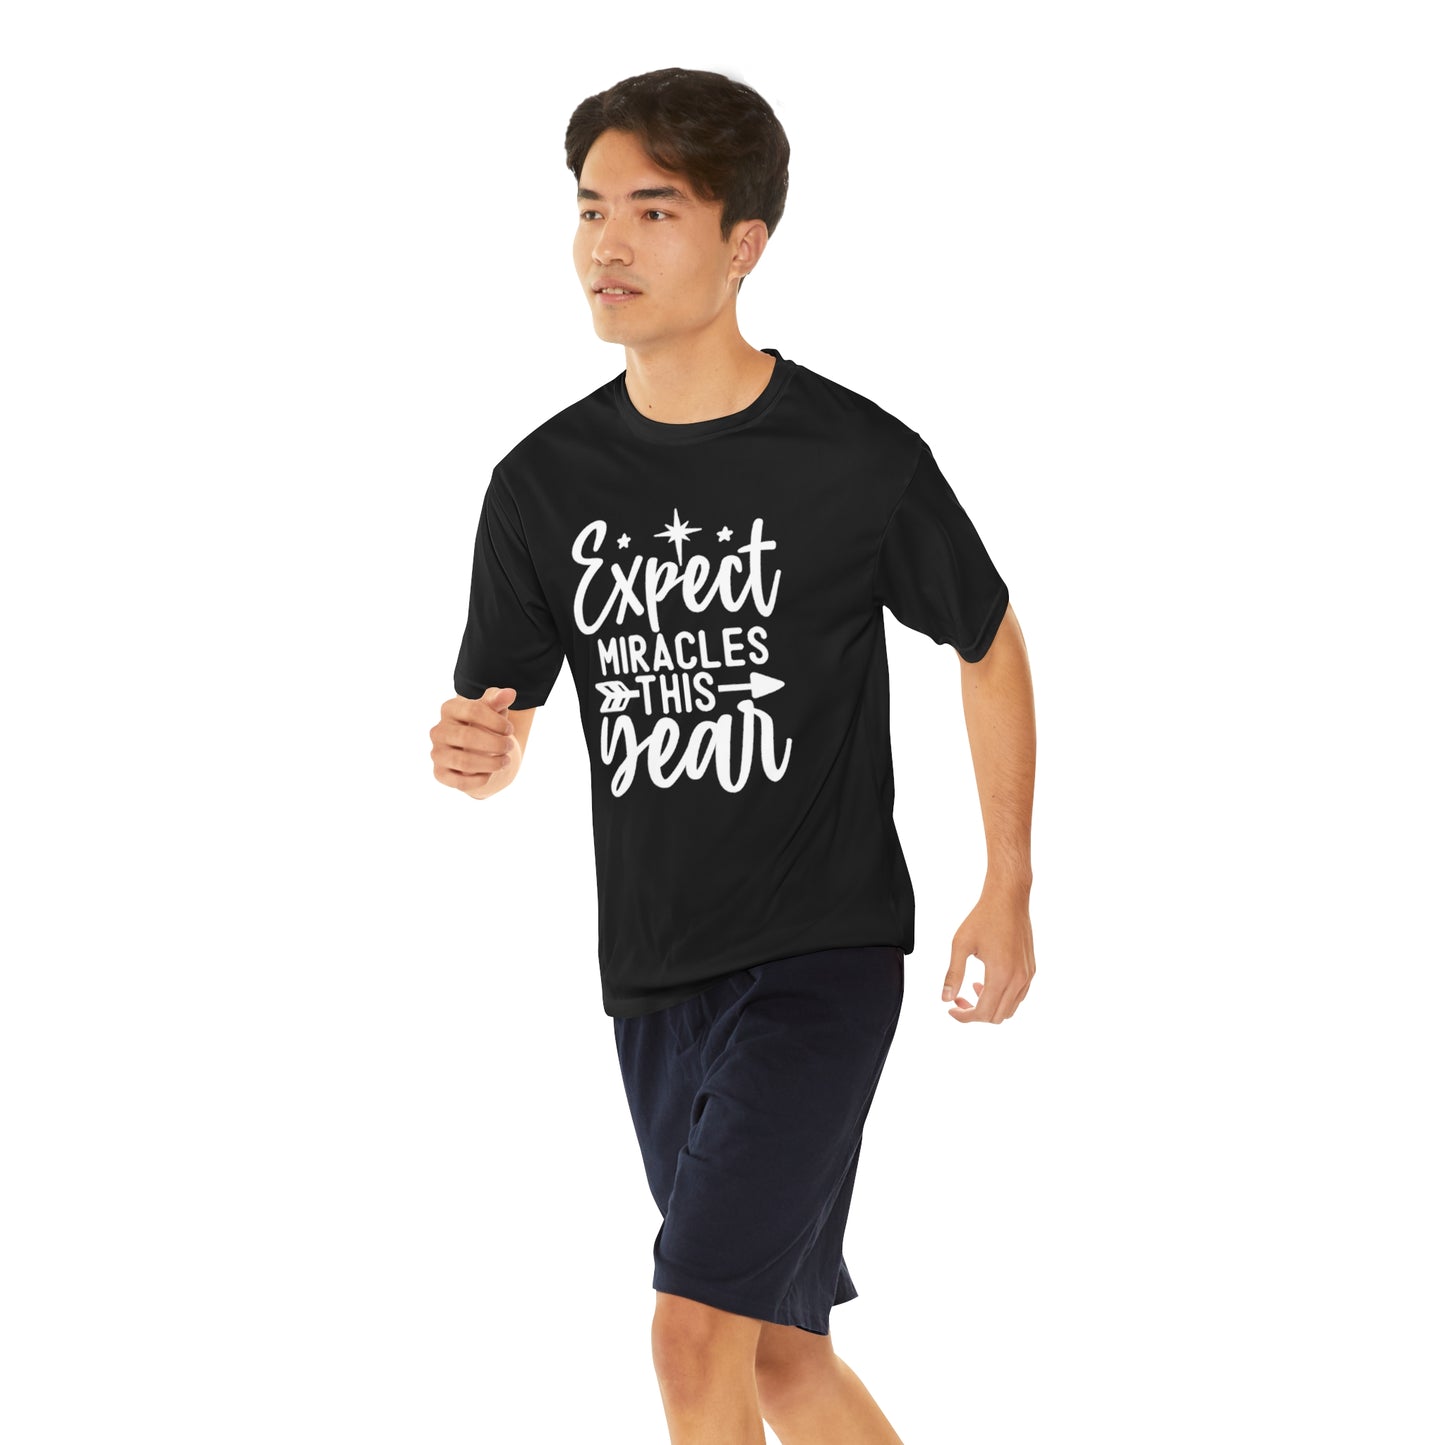 Expect Miracles Men's Performance T-Shirt